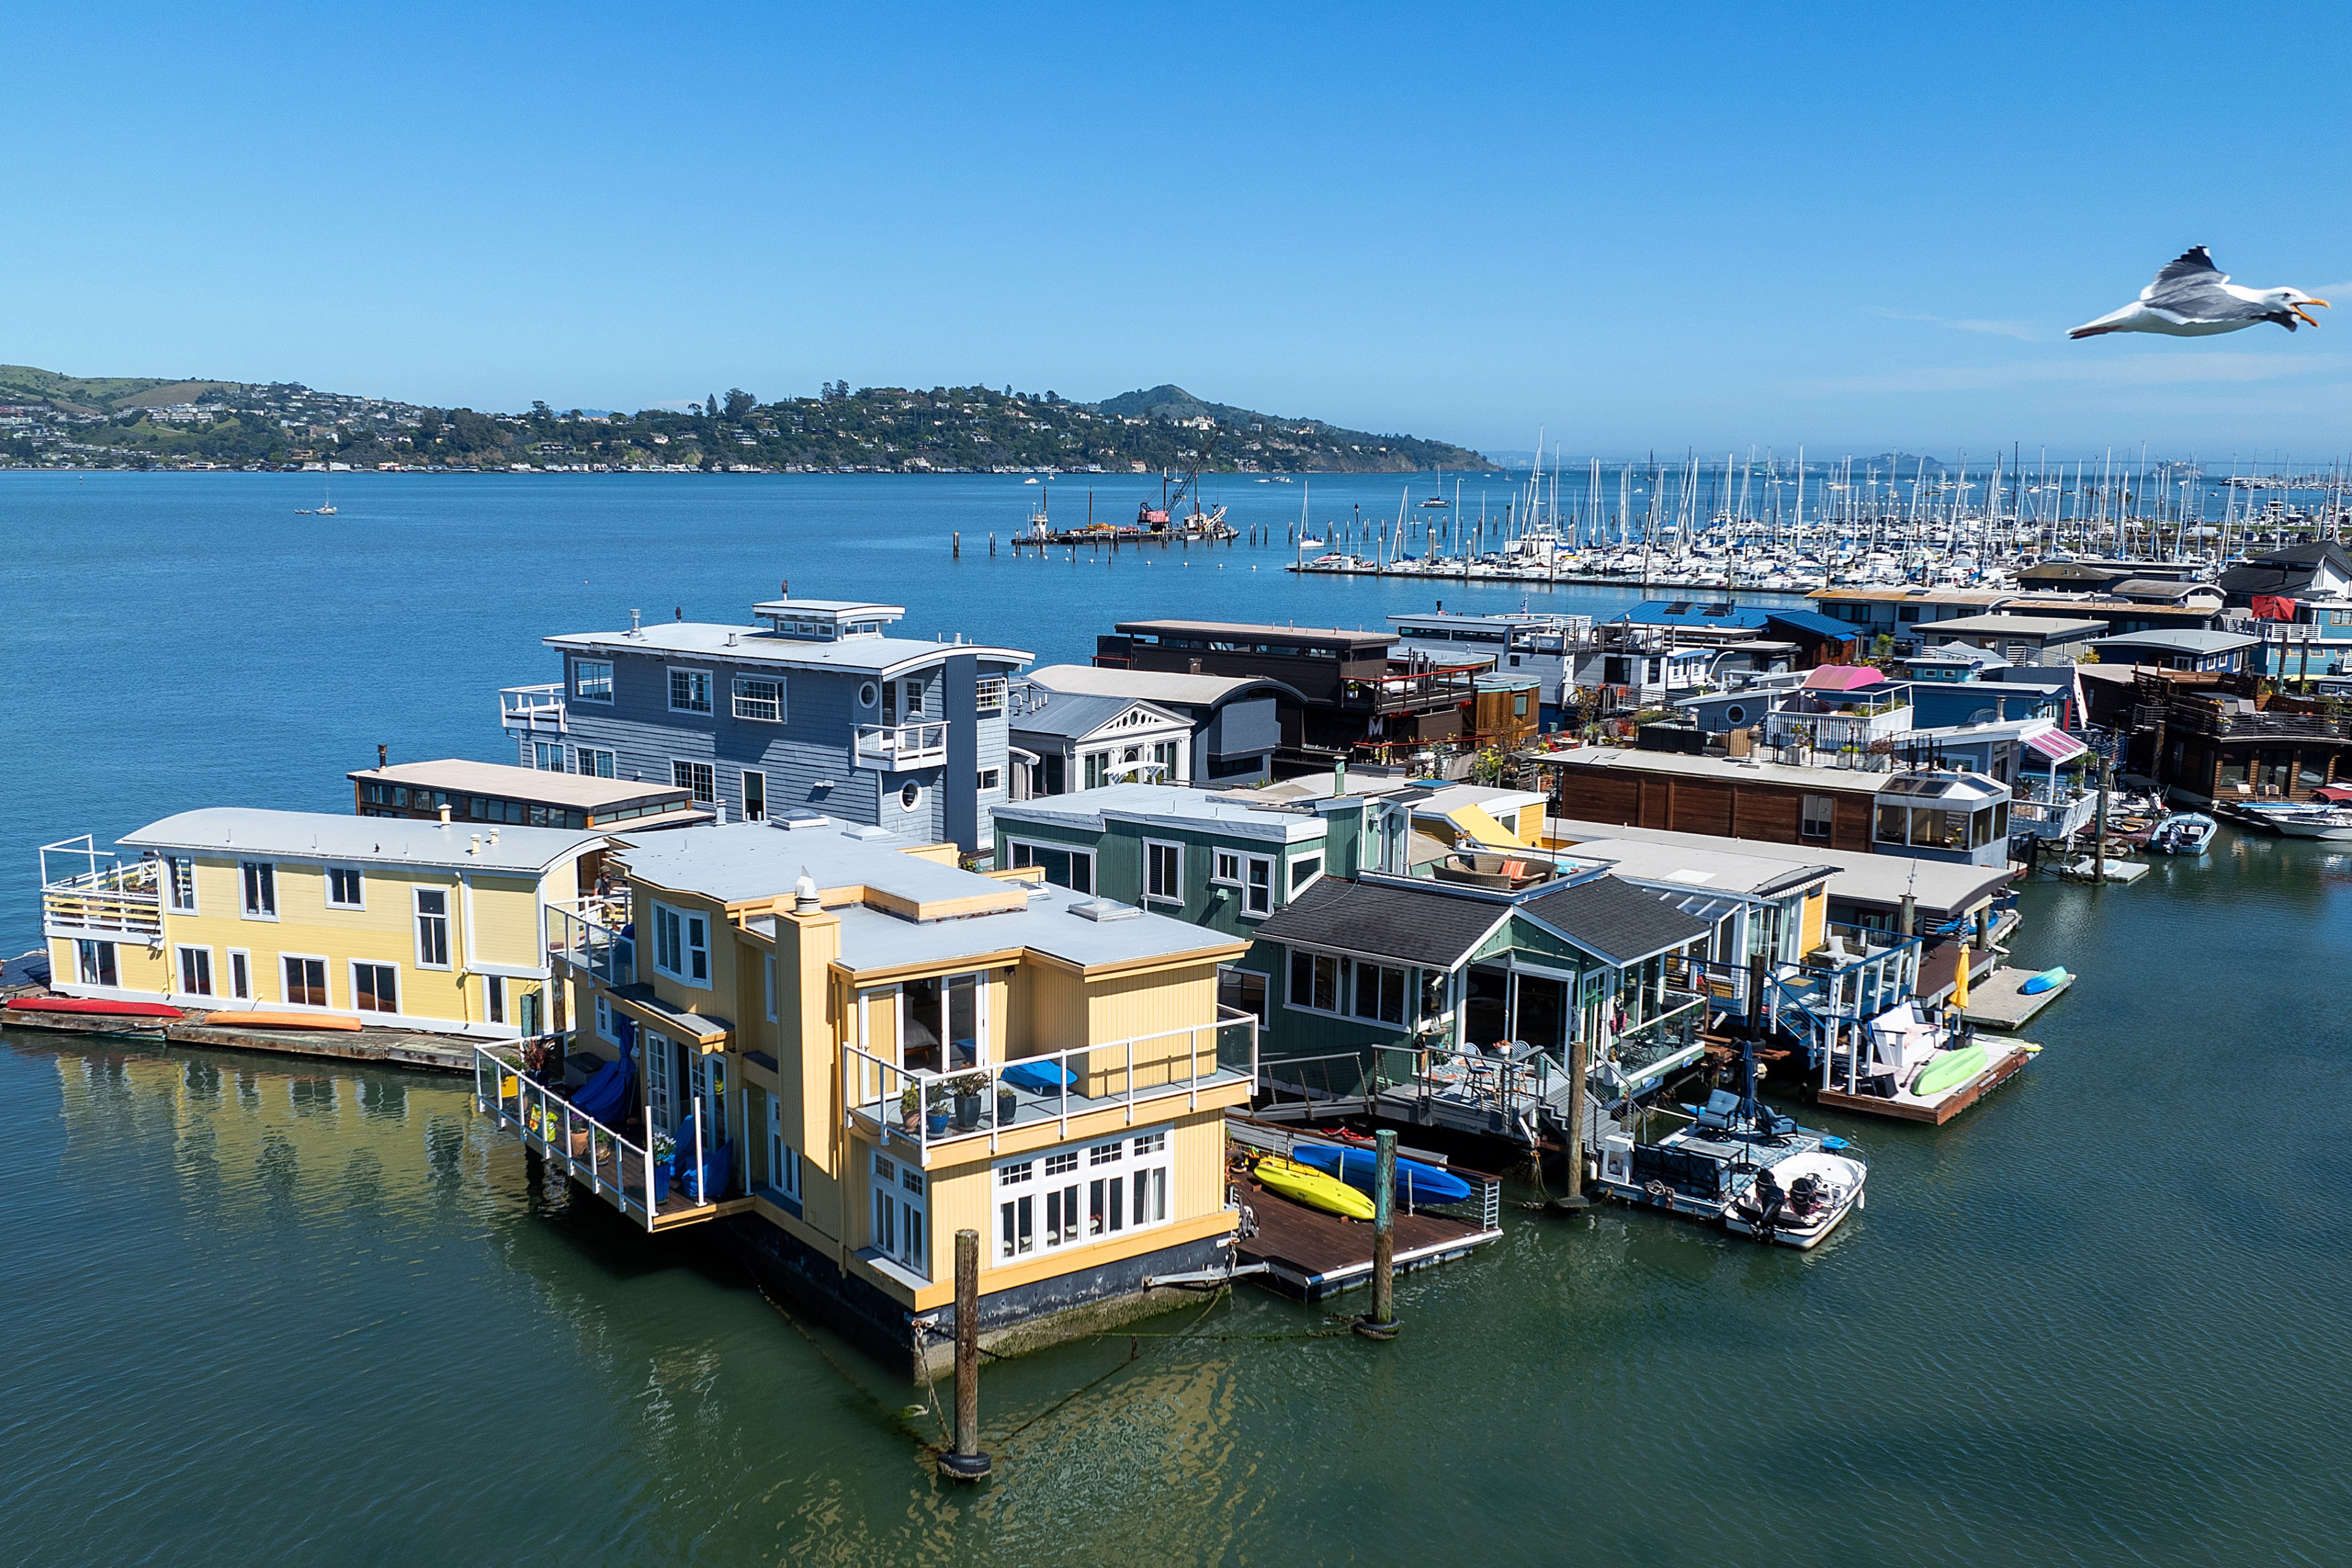 Colorful floating houses by a marina with boats, clear sky, and a seagull flying.